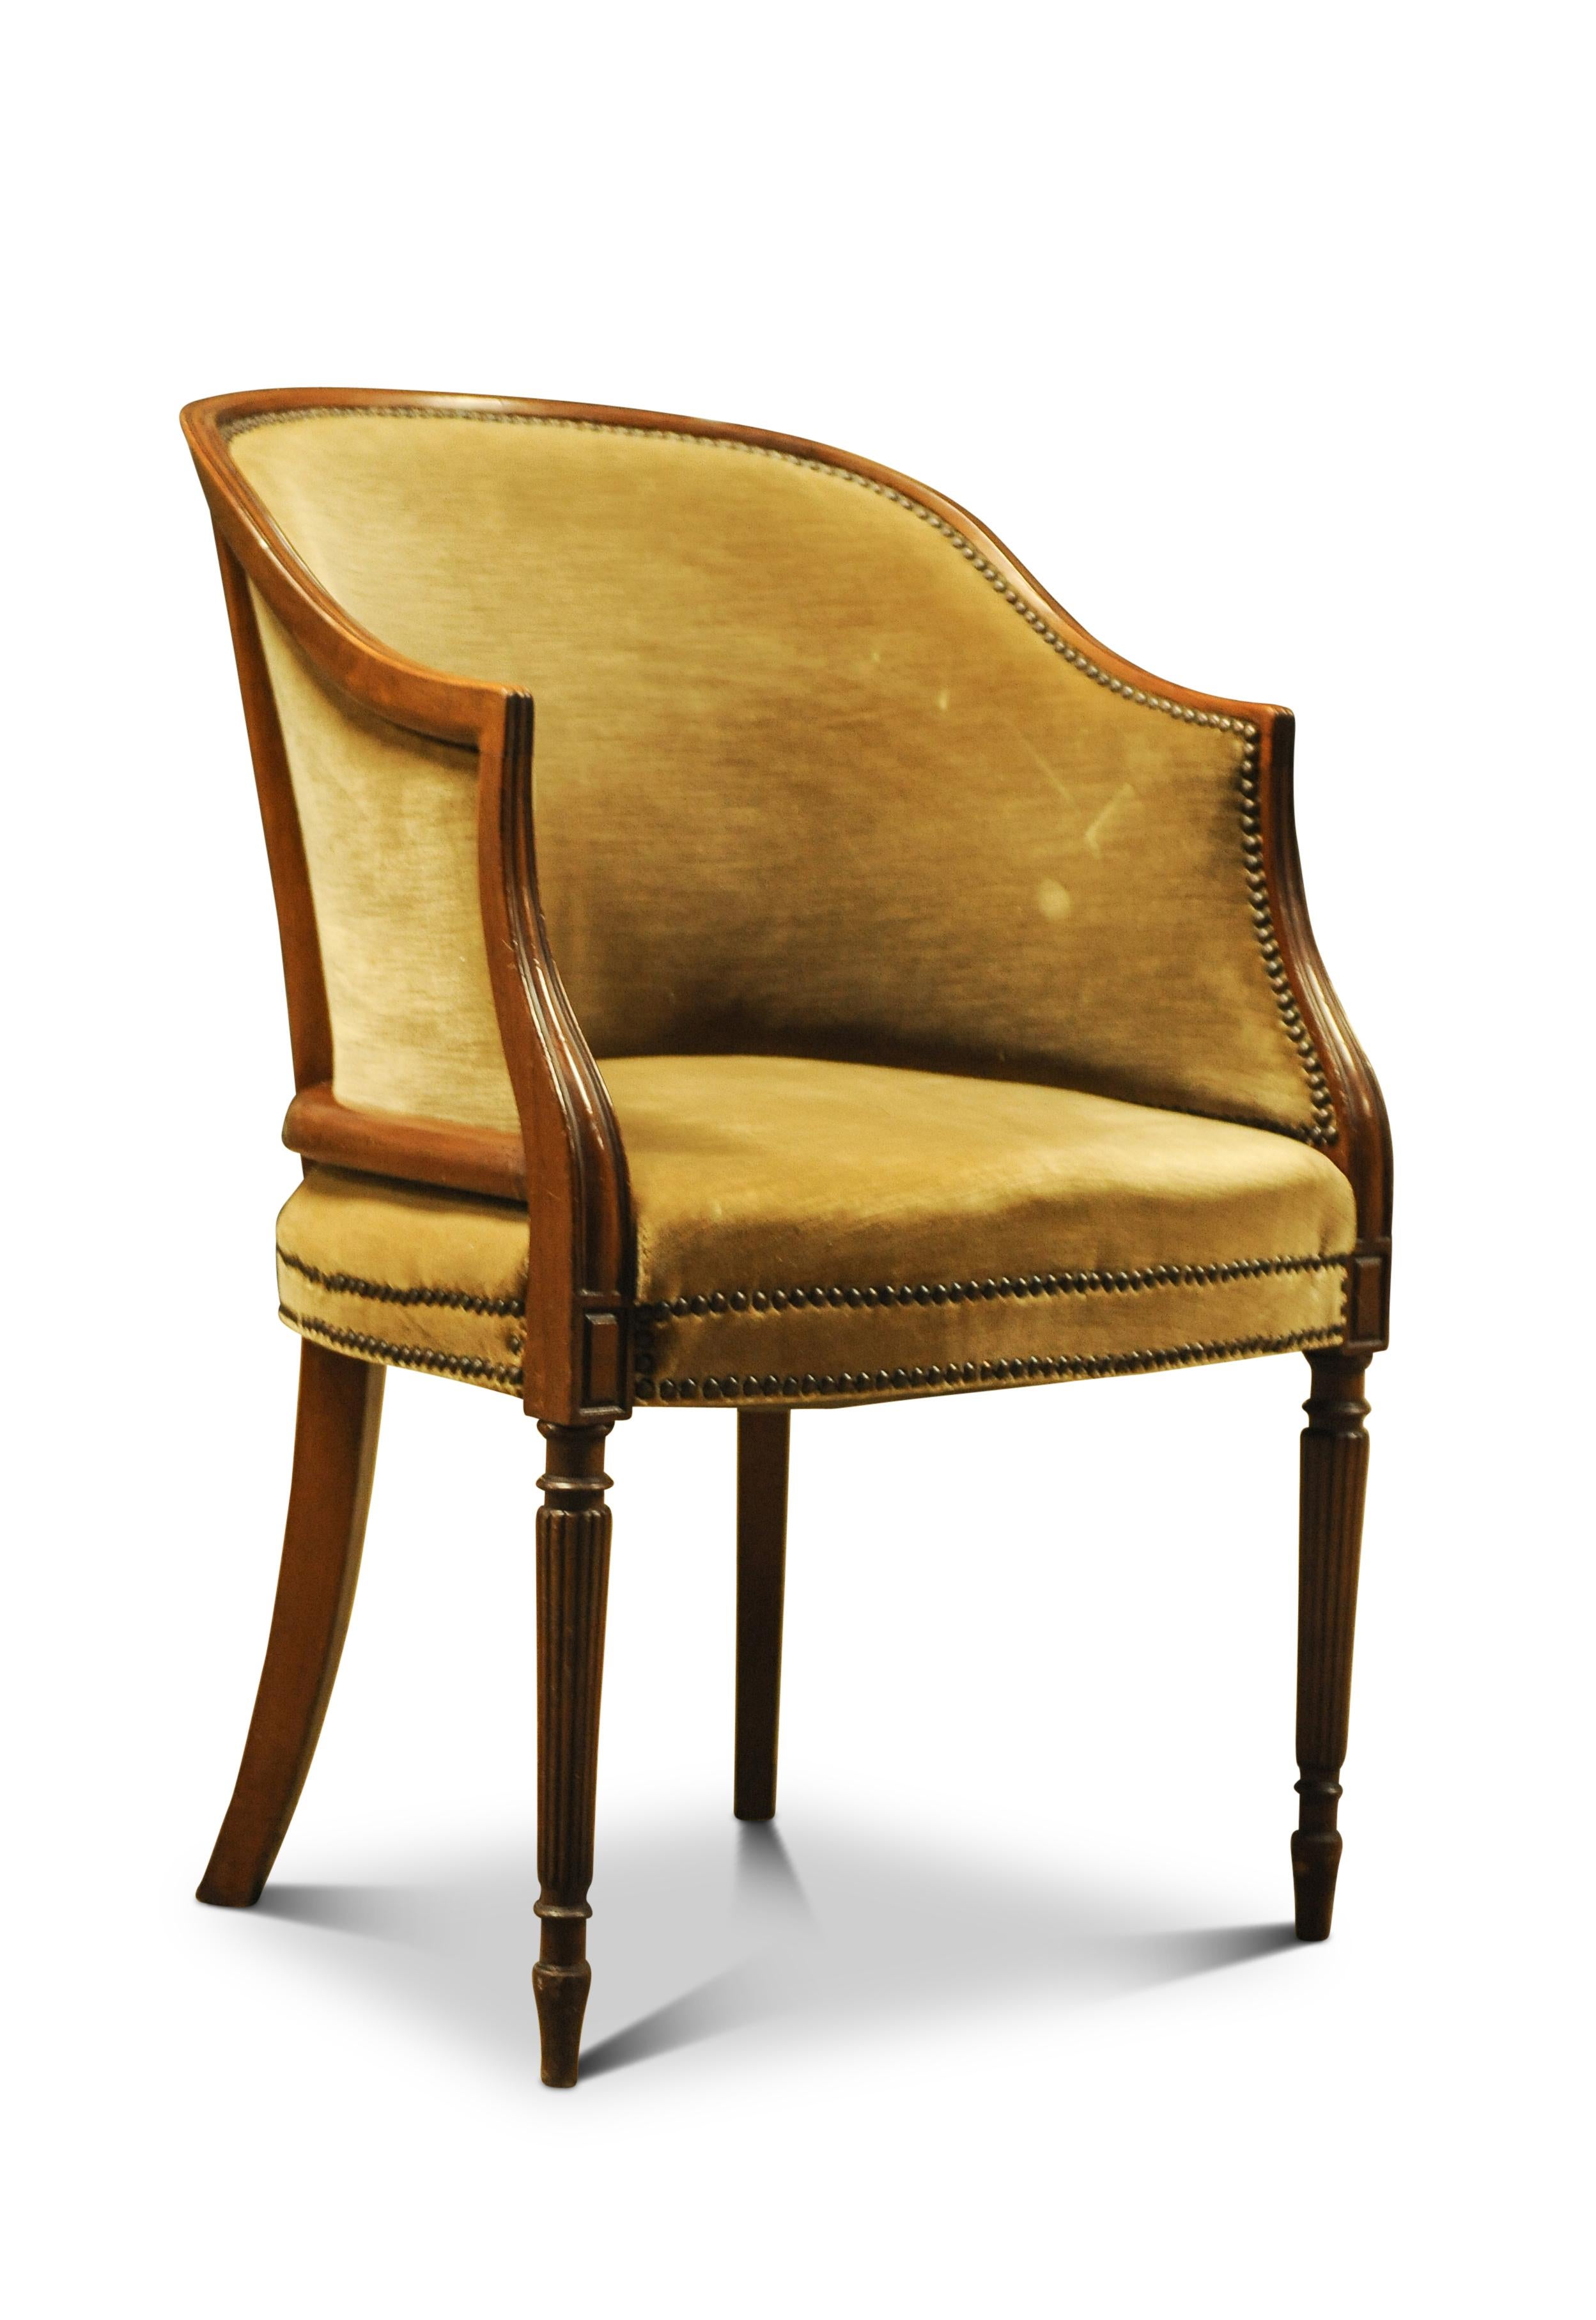 French Walnut Framed Velvet Tub Chair With Brass Studded Borders Raised on Tapered Supports

Classic tub chair well suited to a reading room, or hallway.

Height to arms 70cm
Width of seat 49cm
Depth of seat 45.5cm